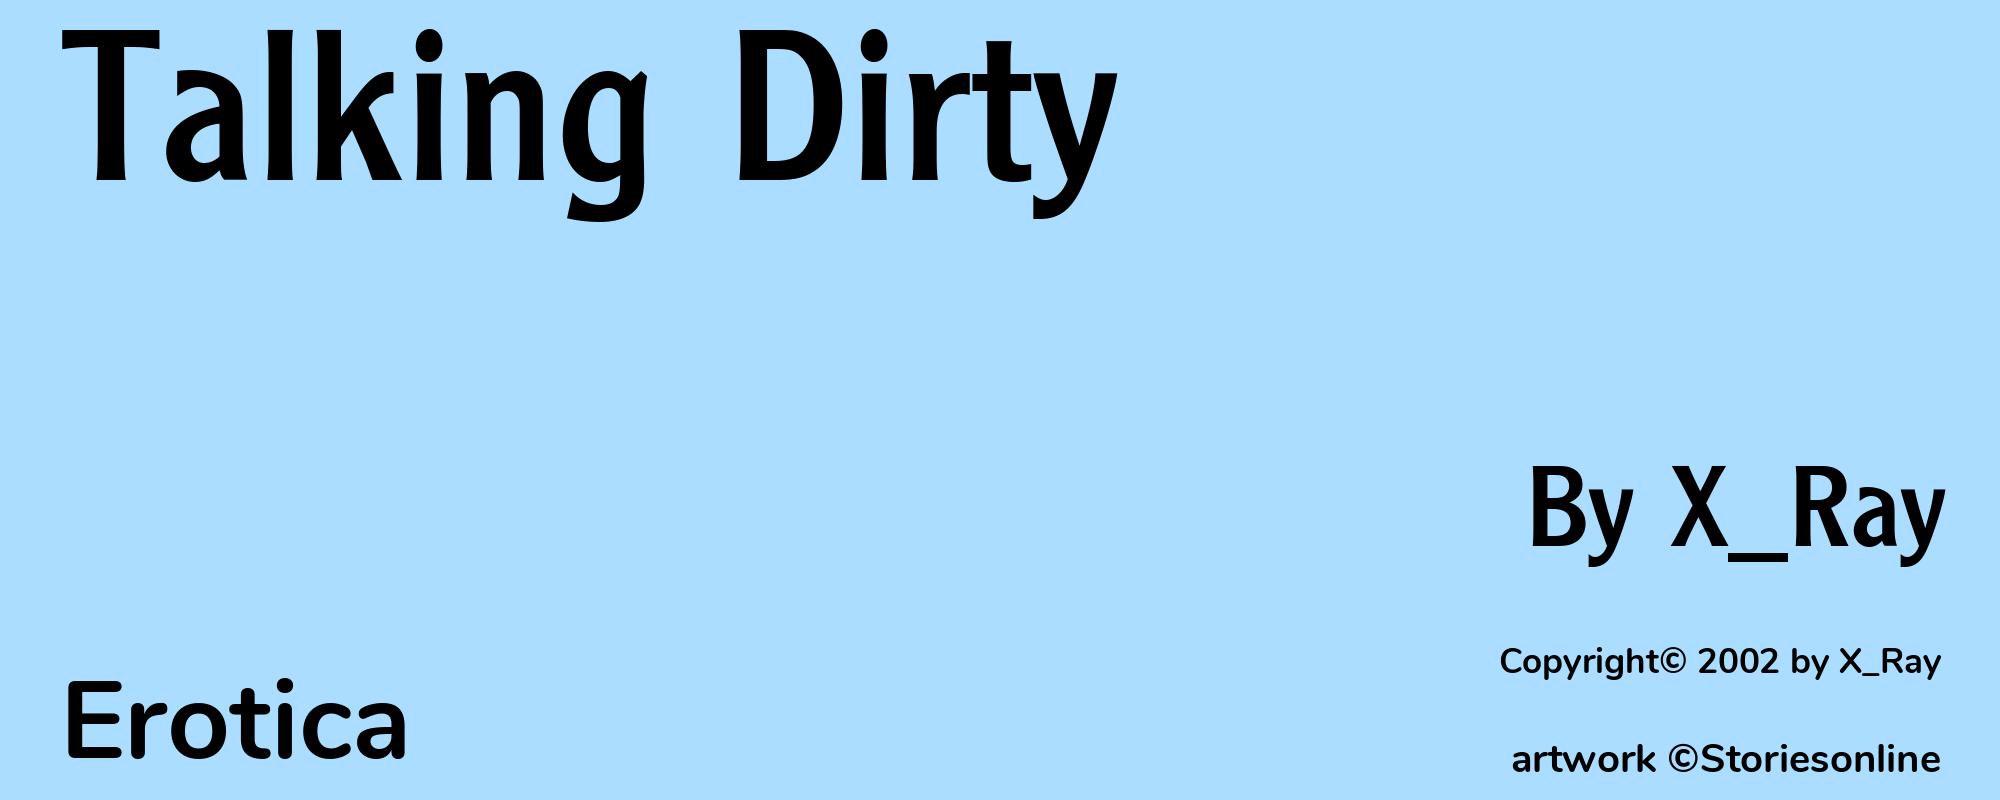 Talking Dirty - Cover